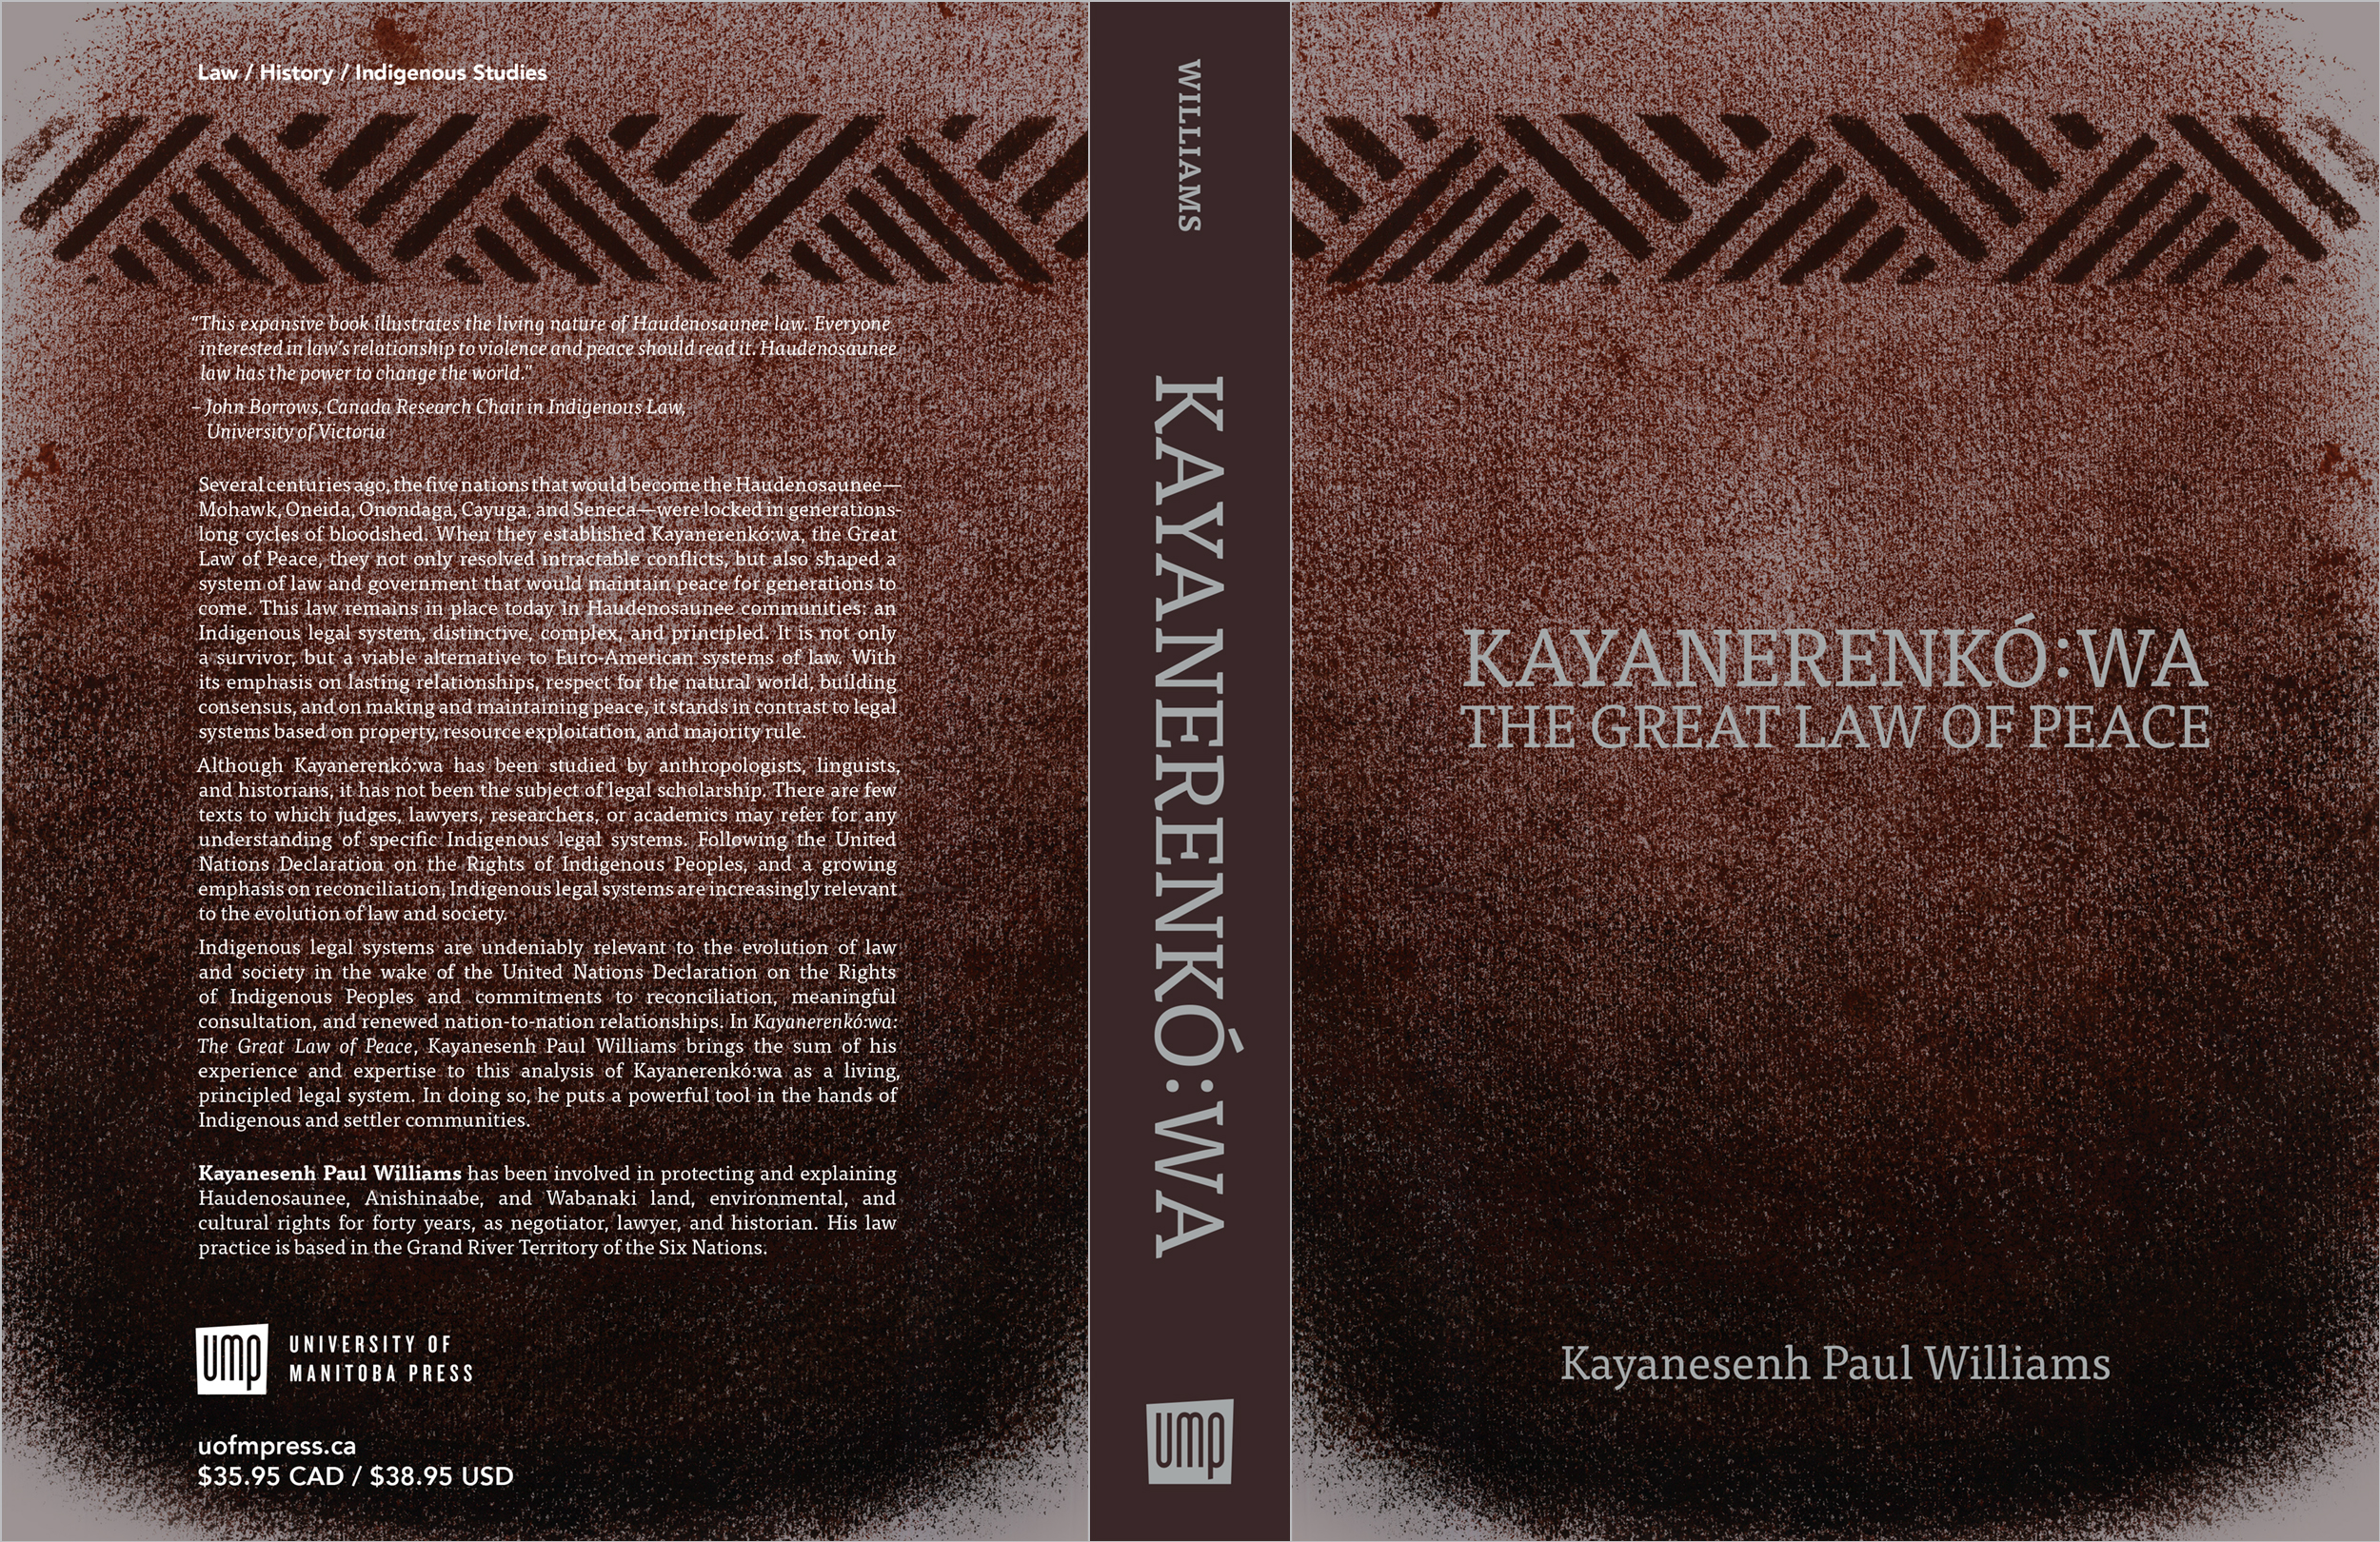 Kayanerenkó:wa (The Great Law of Peace)